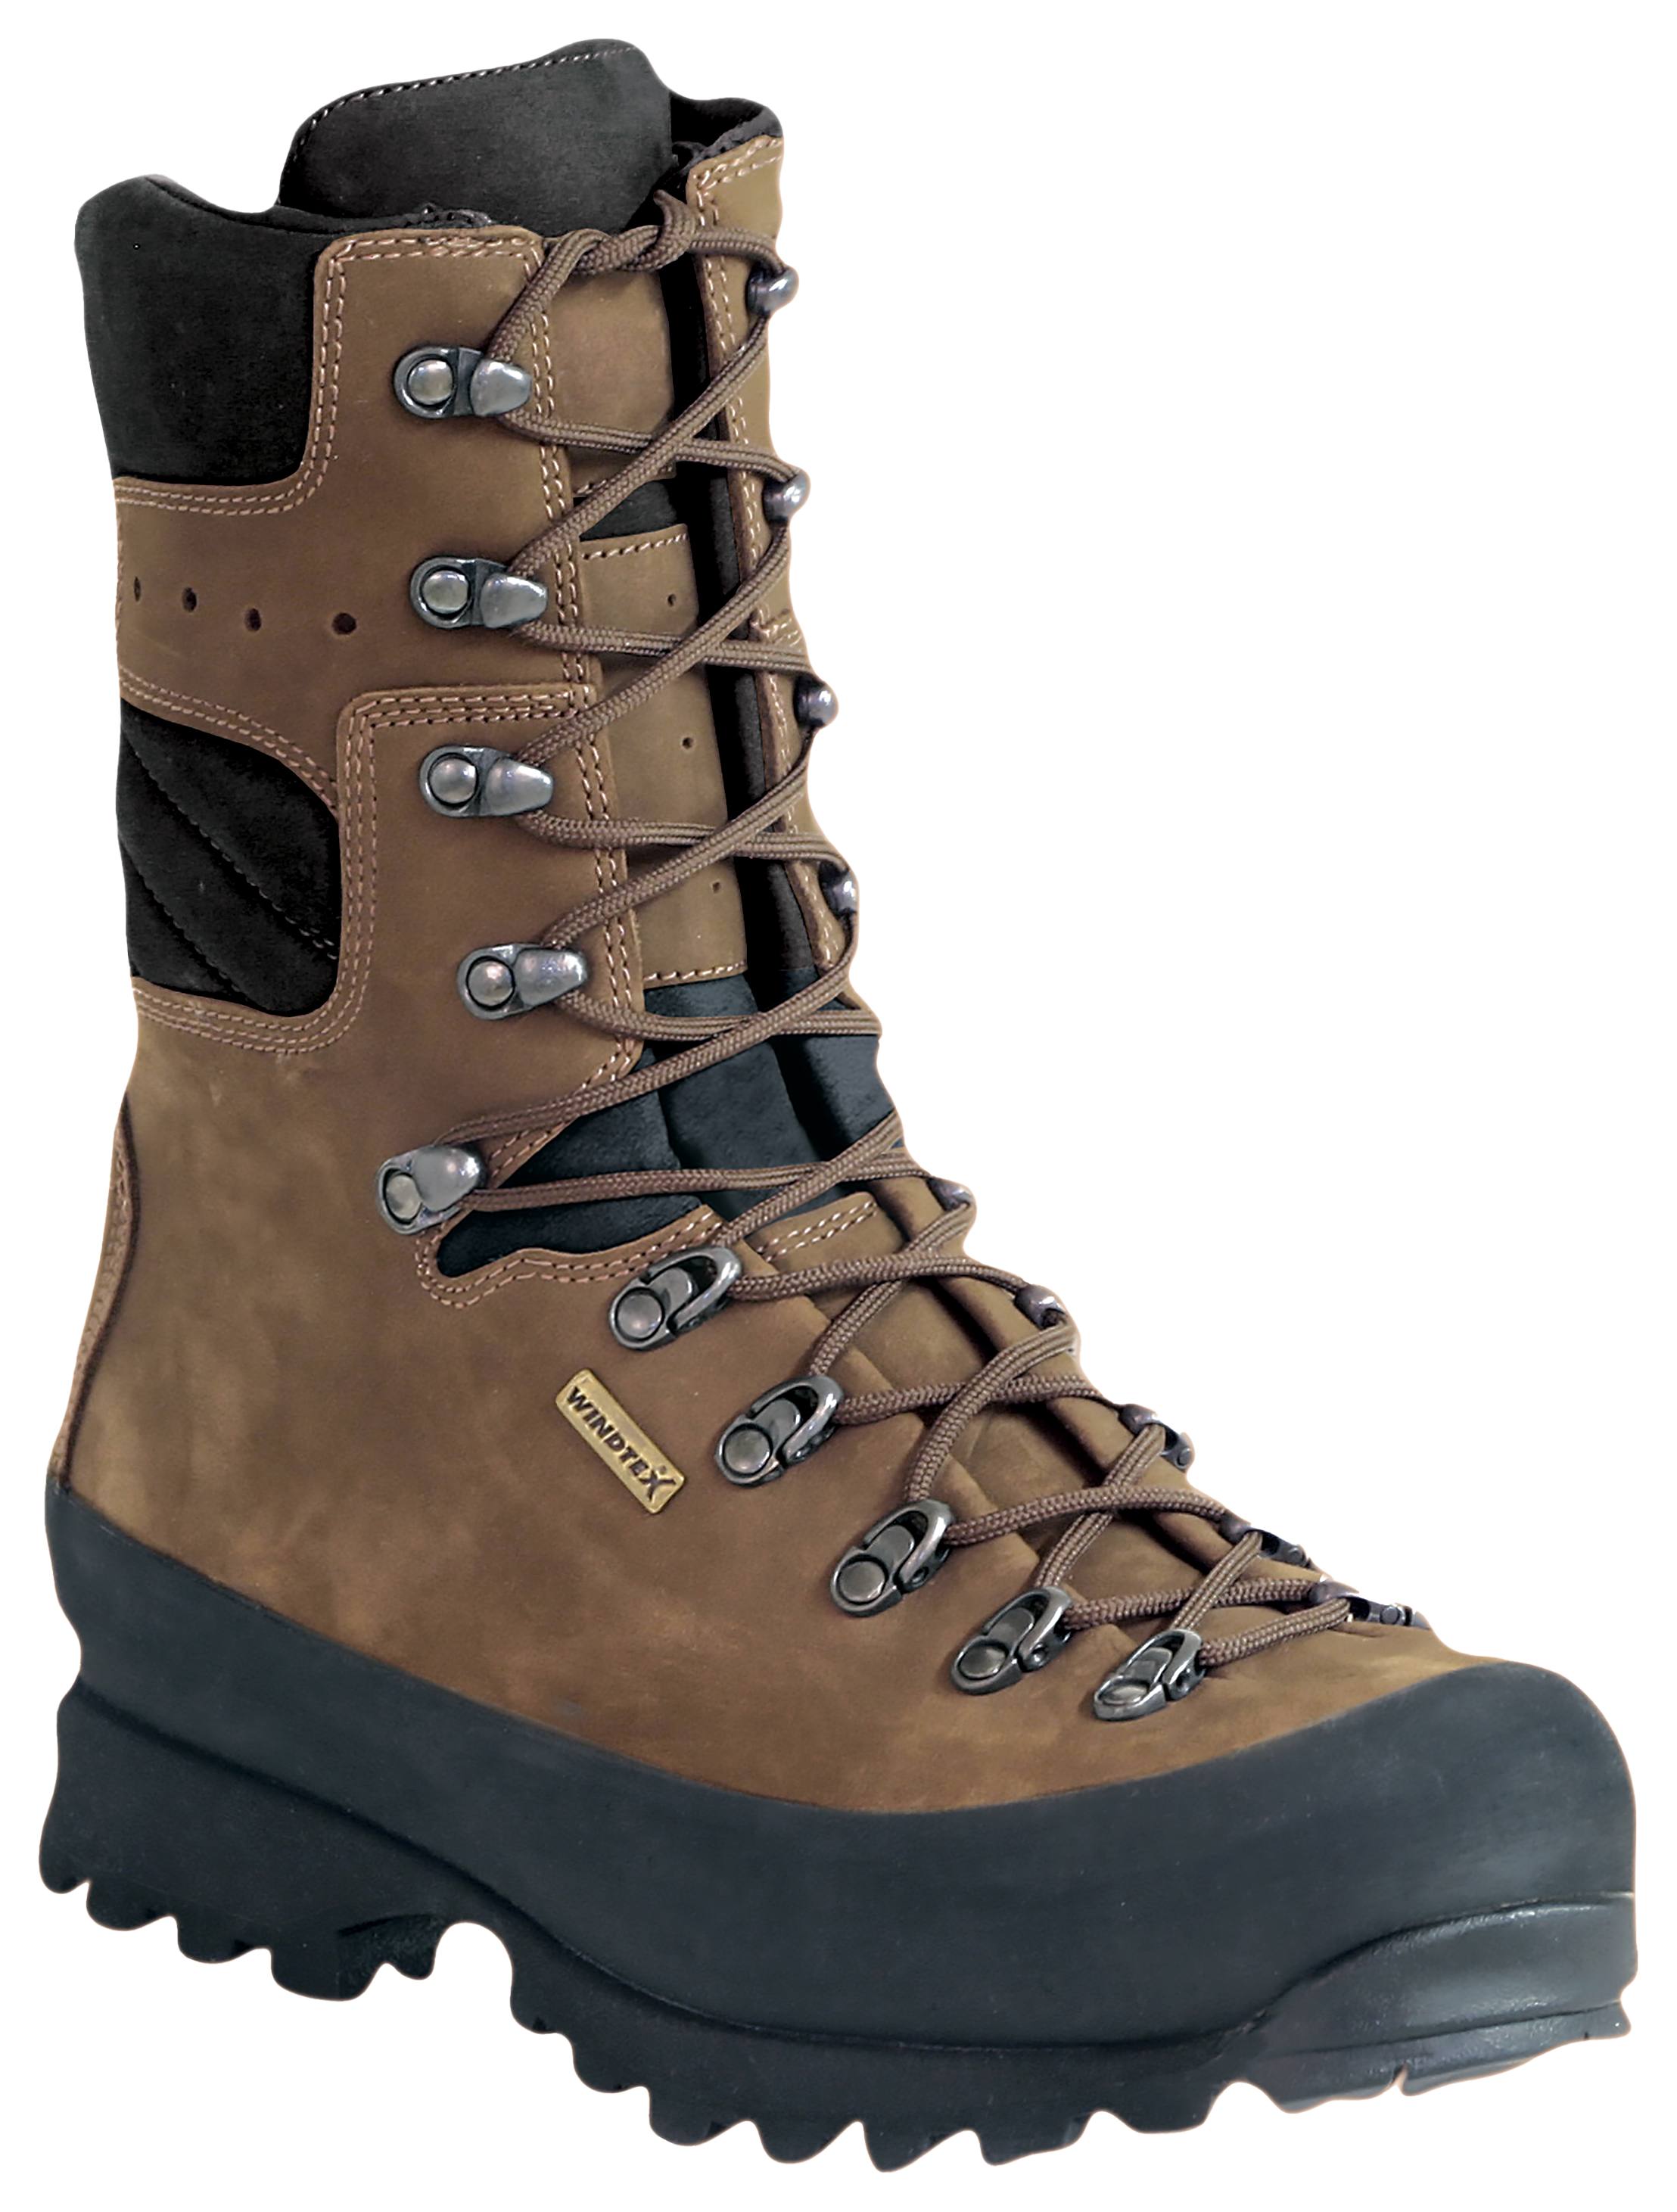 Kenetrek Mountain Extreme 1000 Insulated Waterproof Hunting Boots for Men - Brown - 11M